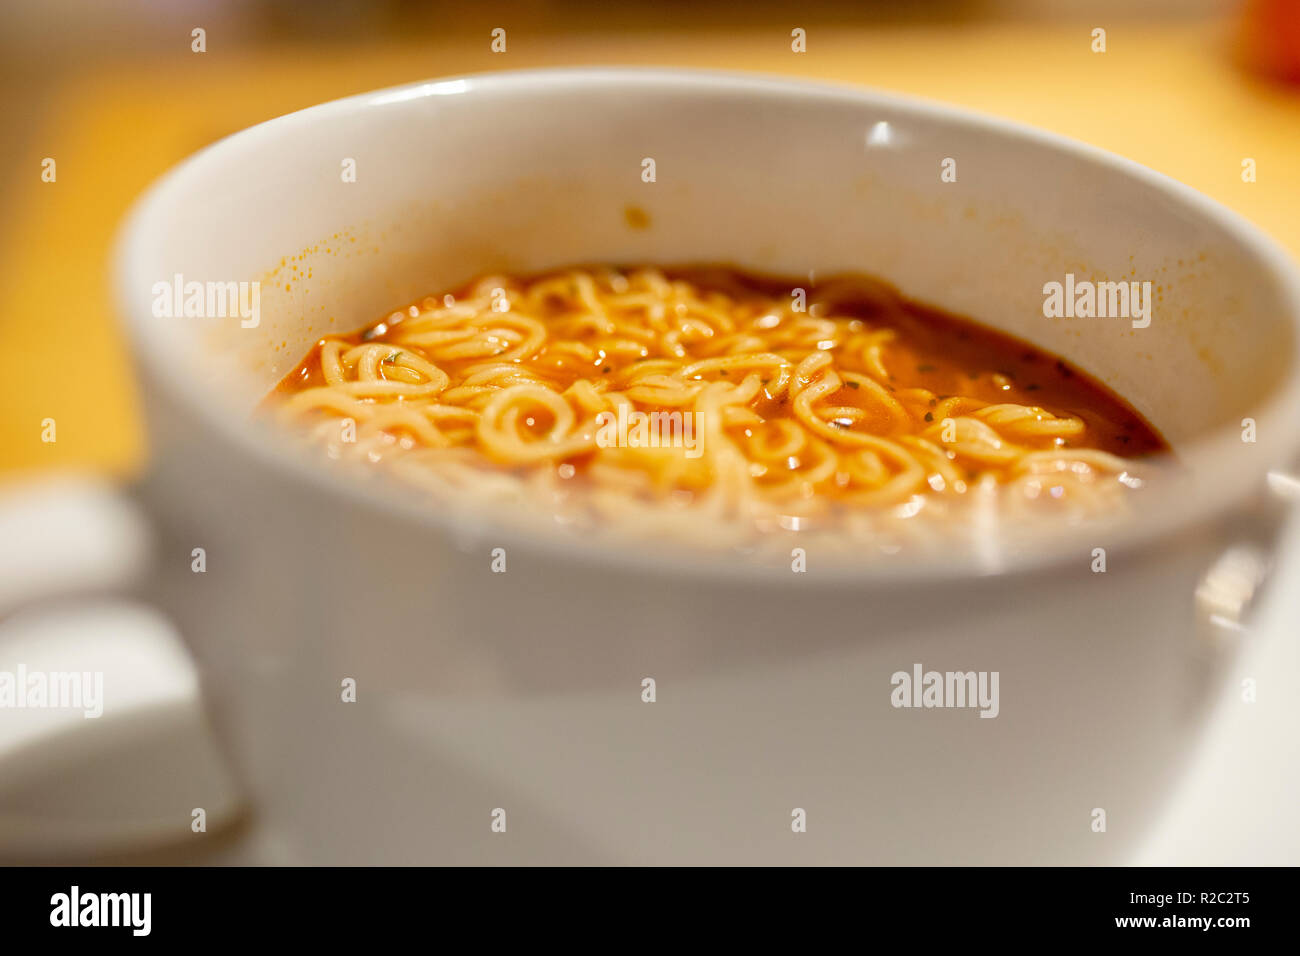 Hot spicy noodle soup closeup with out of focus elements Stock Photo